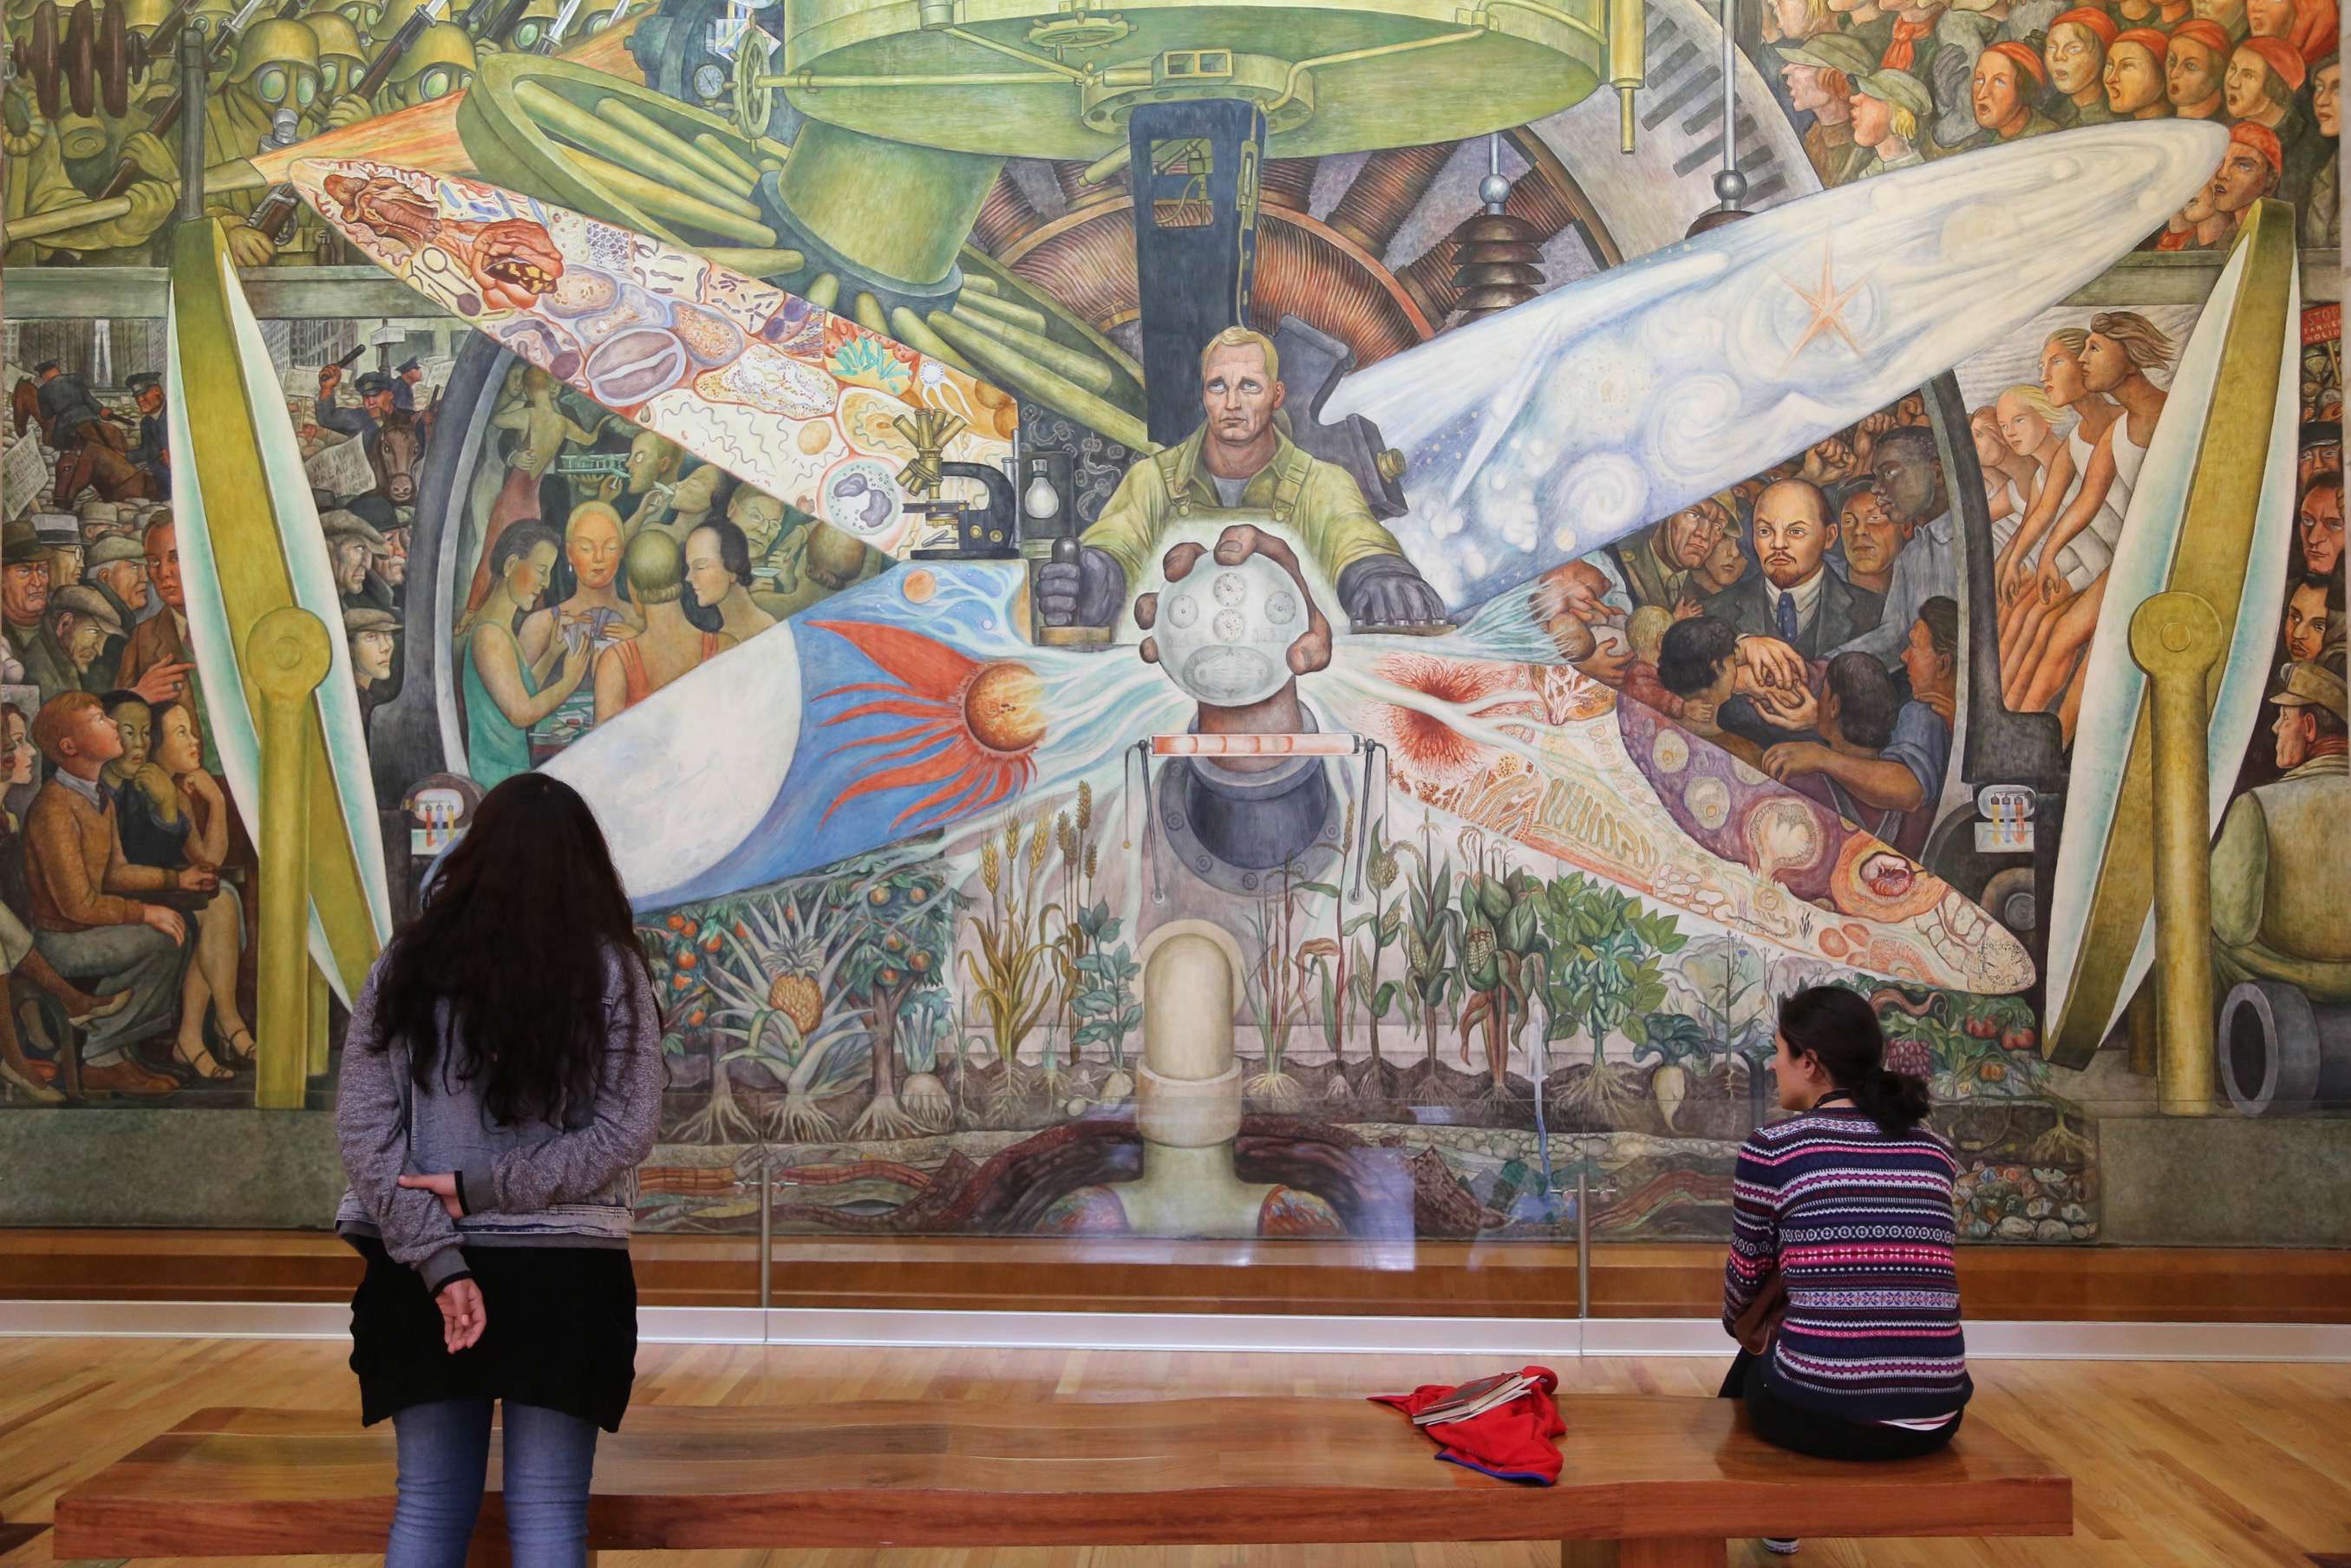 A great deal of 'story' can be found in the murals at Bellas Artes.